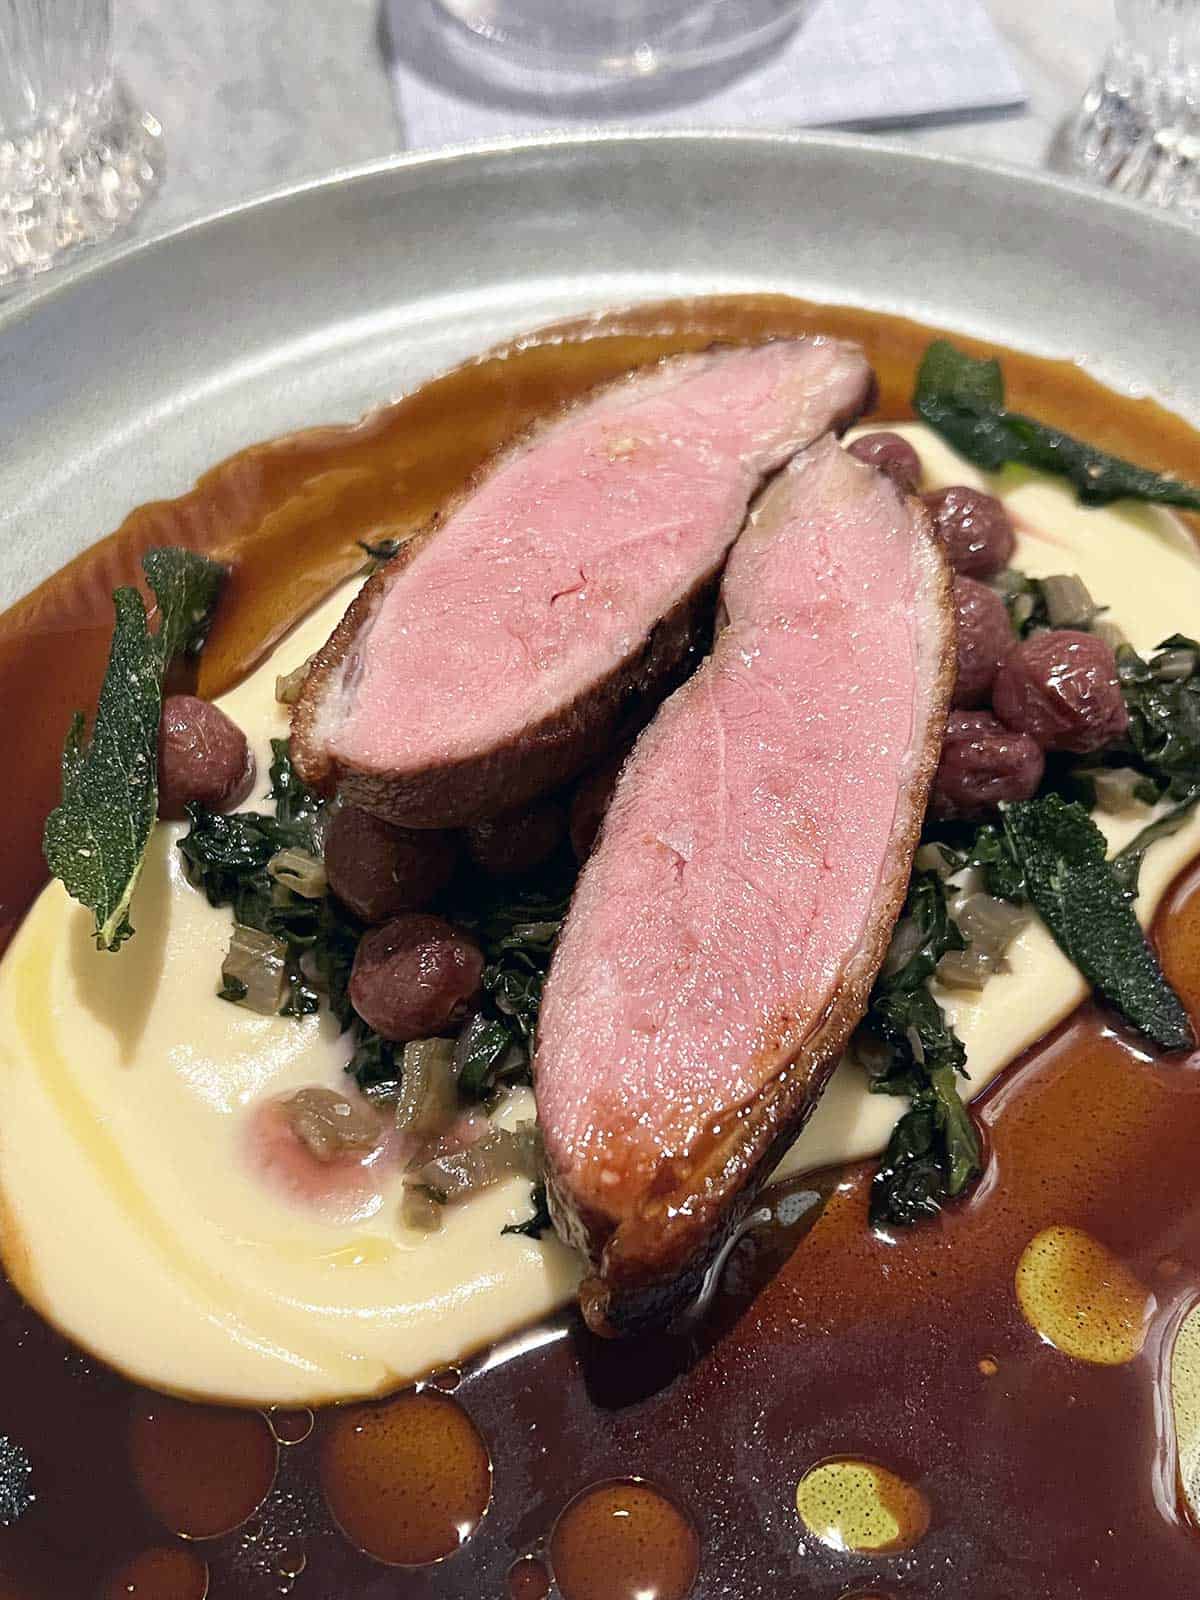 Pan fried duck breast with parsnip puree.